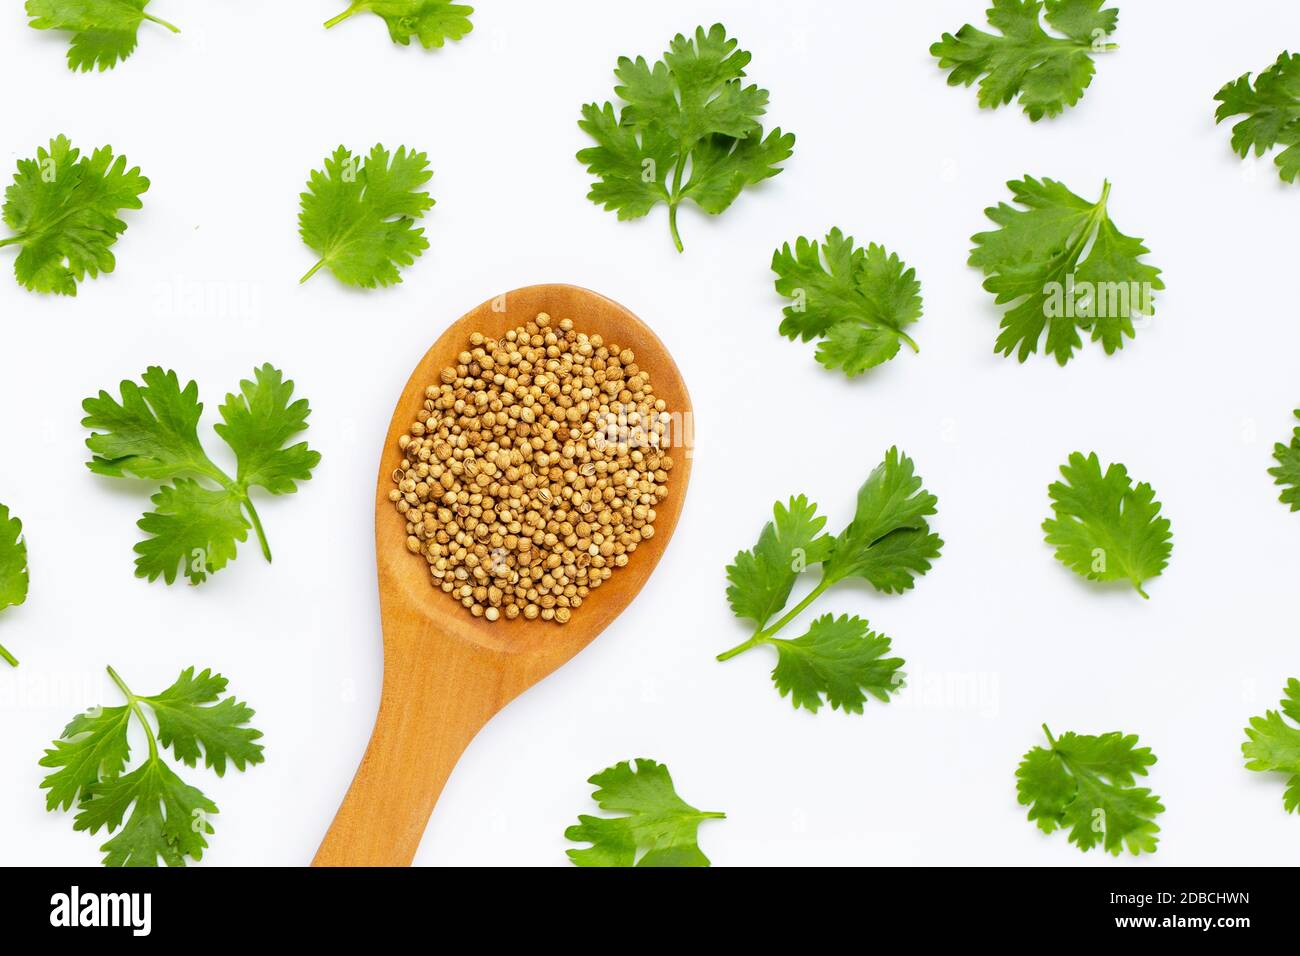 Coriander seeds with fresh leaves isolated on white background. Stock Photo